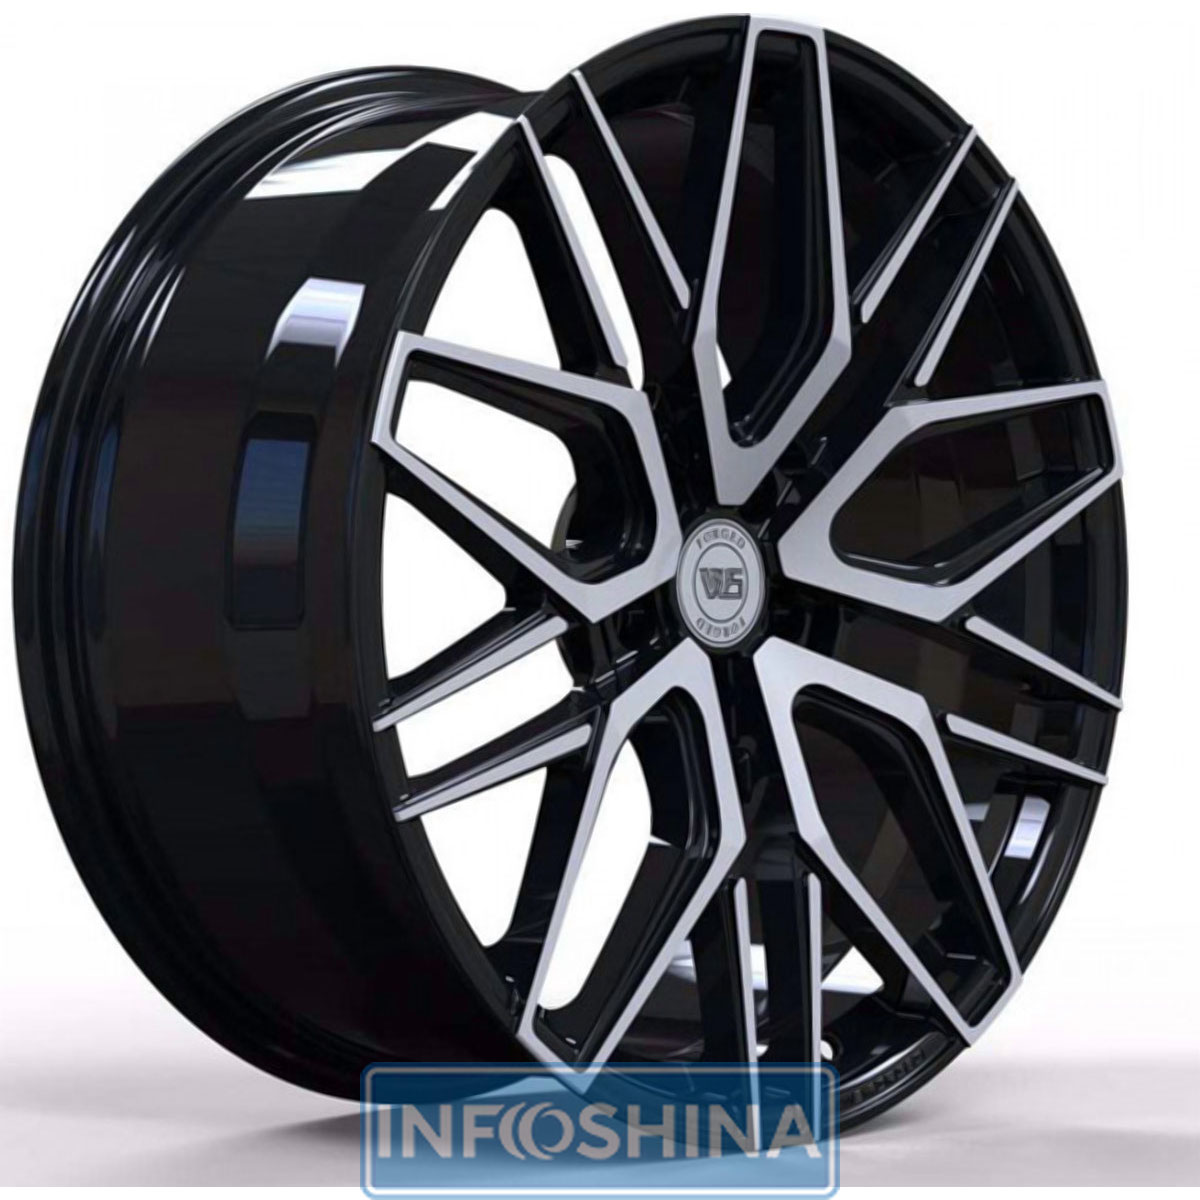 Купить диски WS Forged WS1281 Gloss Black With Machined Face R20 W9 PCD5x112 ET35 DIA66.5